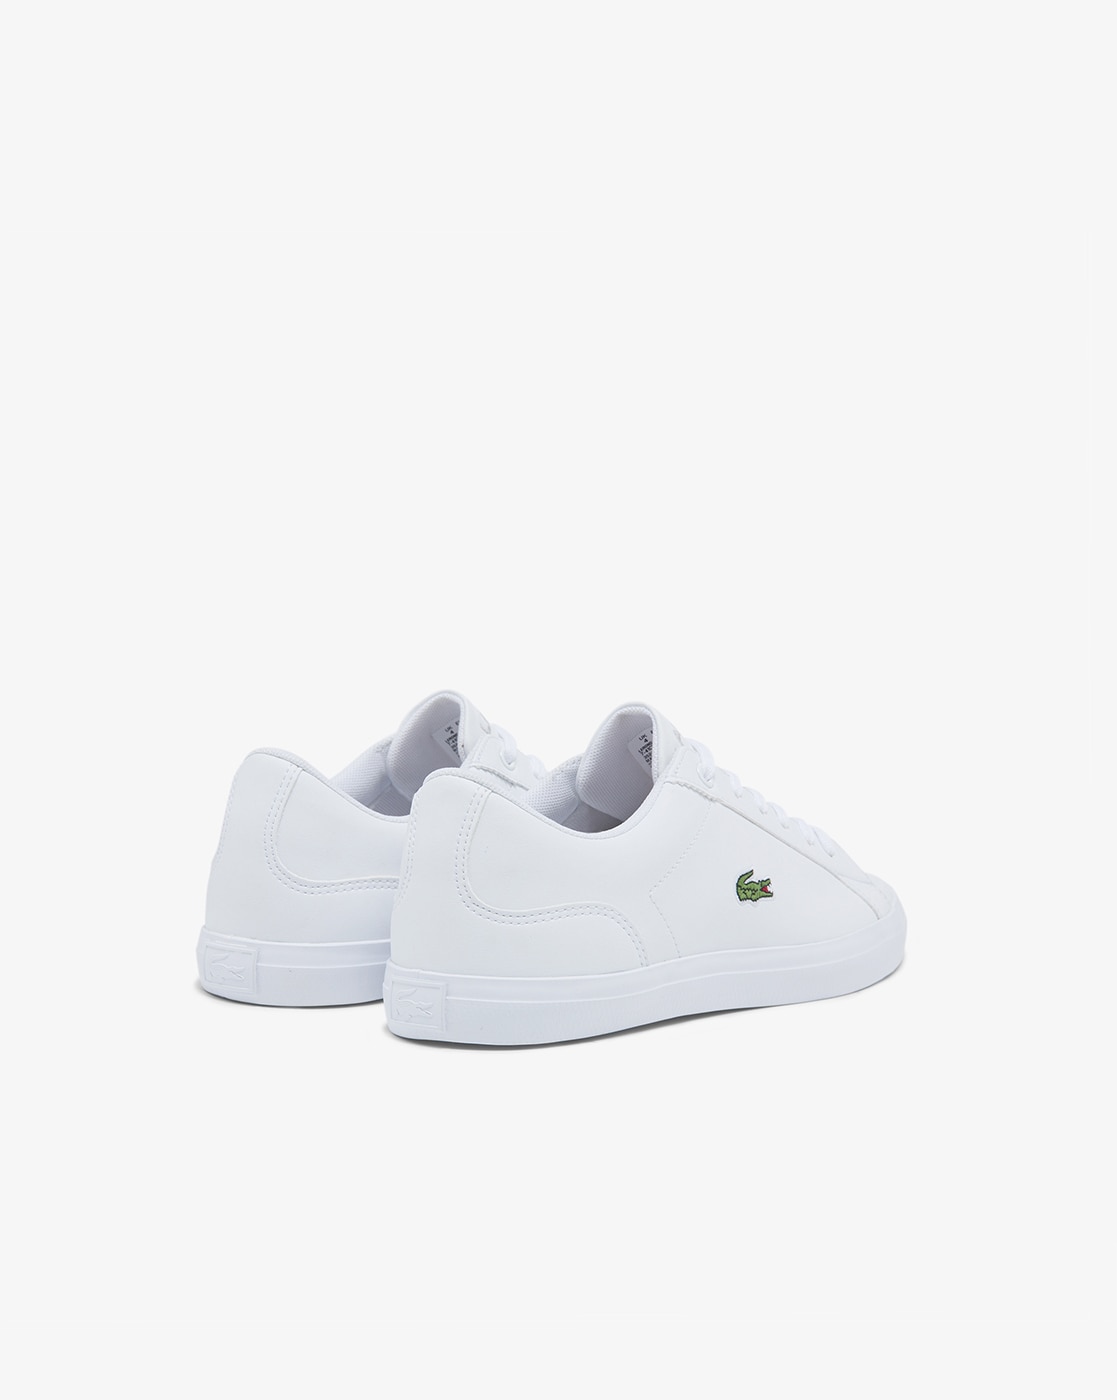 LACOSTE CARNABY EVO LEATHER SHOES Man White | Mascheroni Store